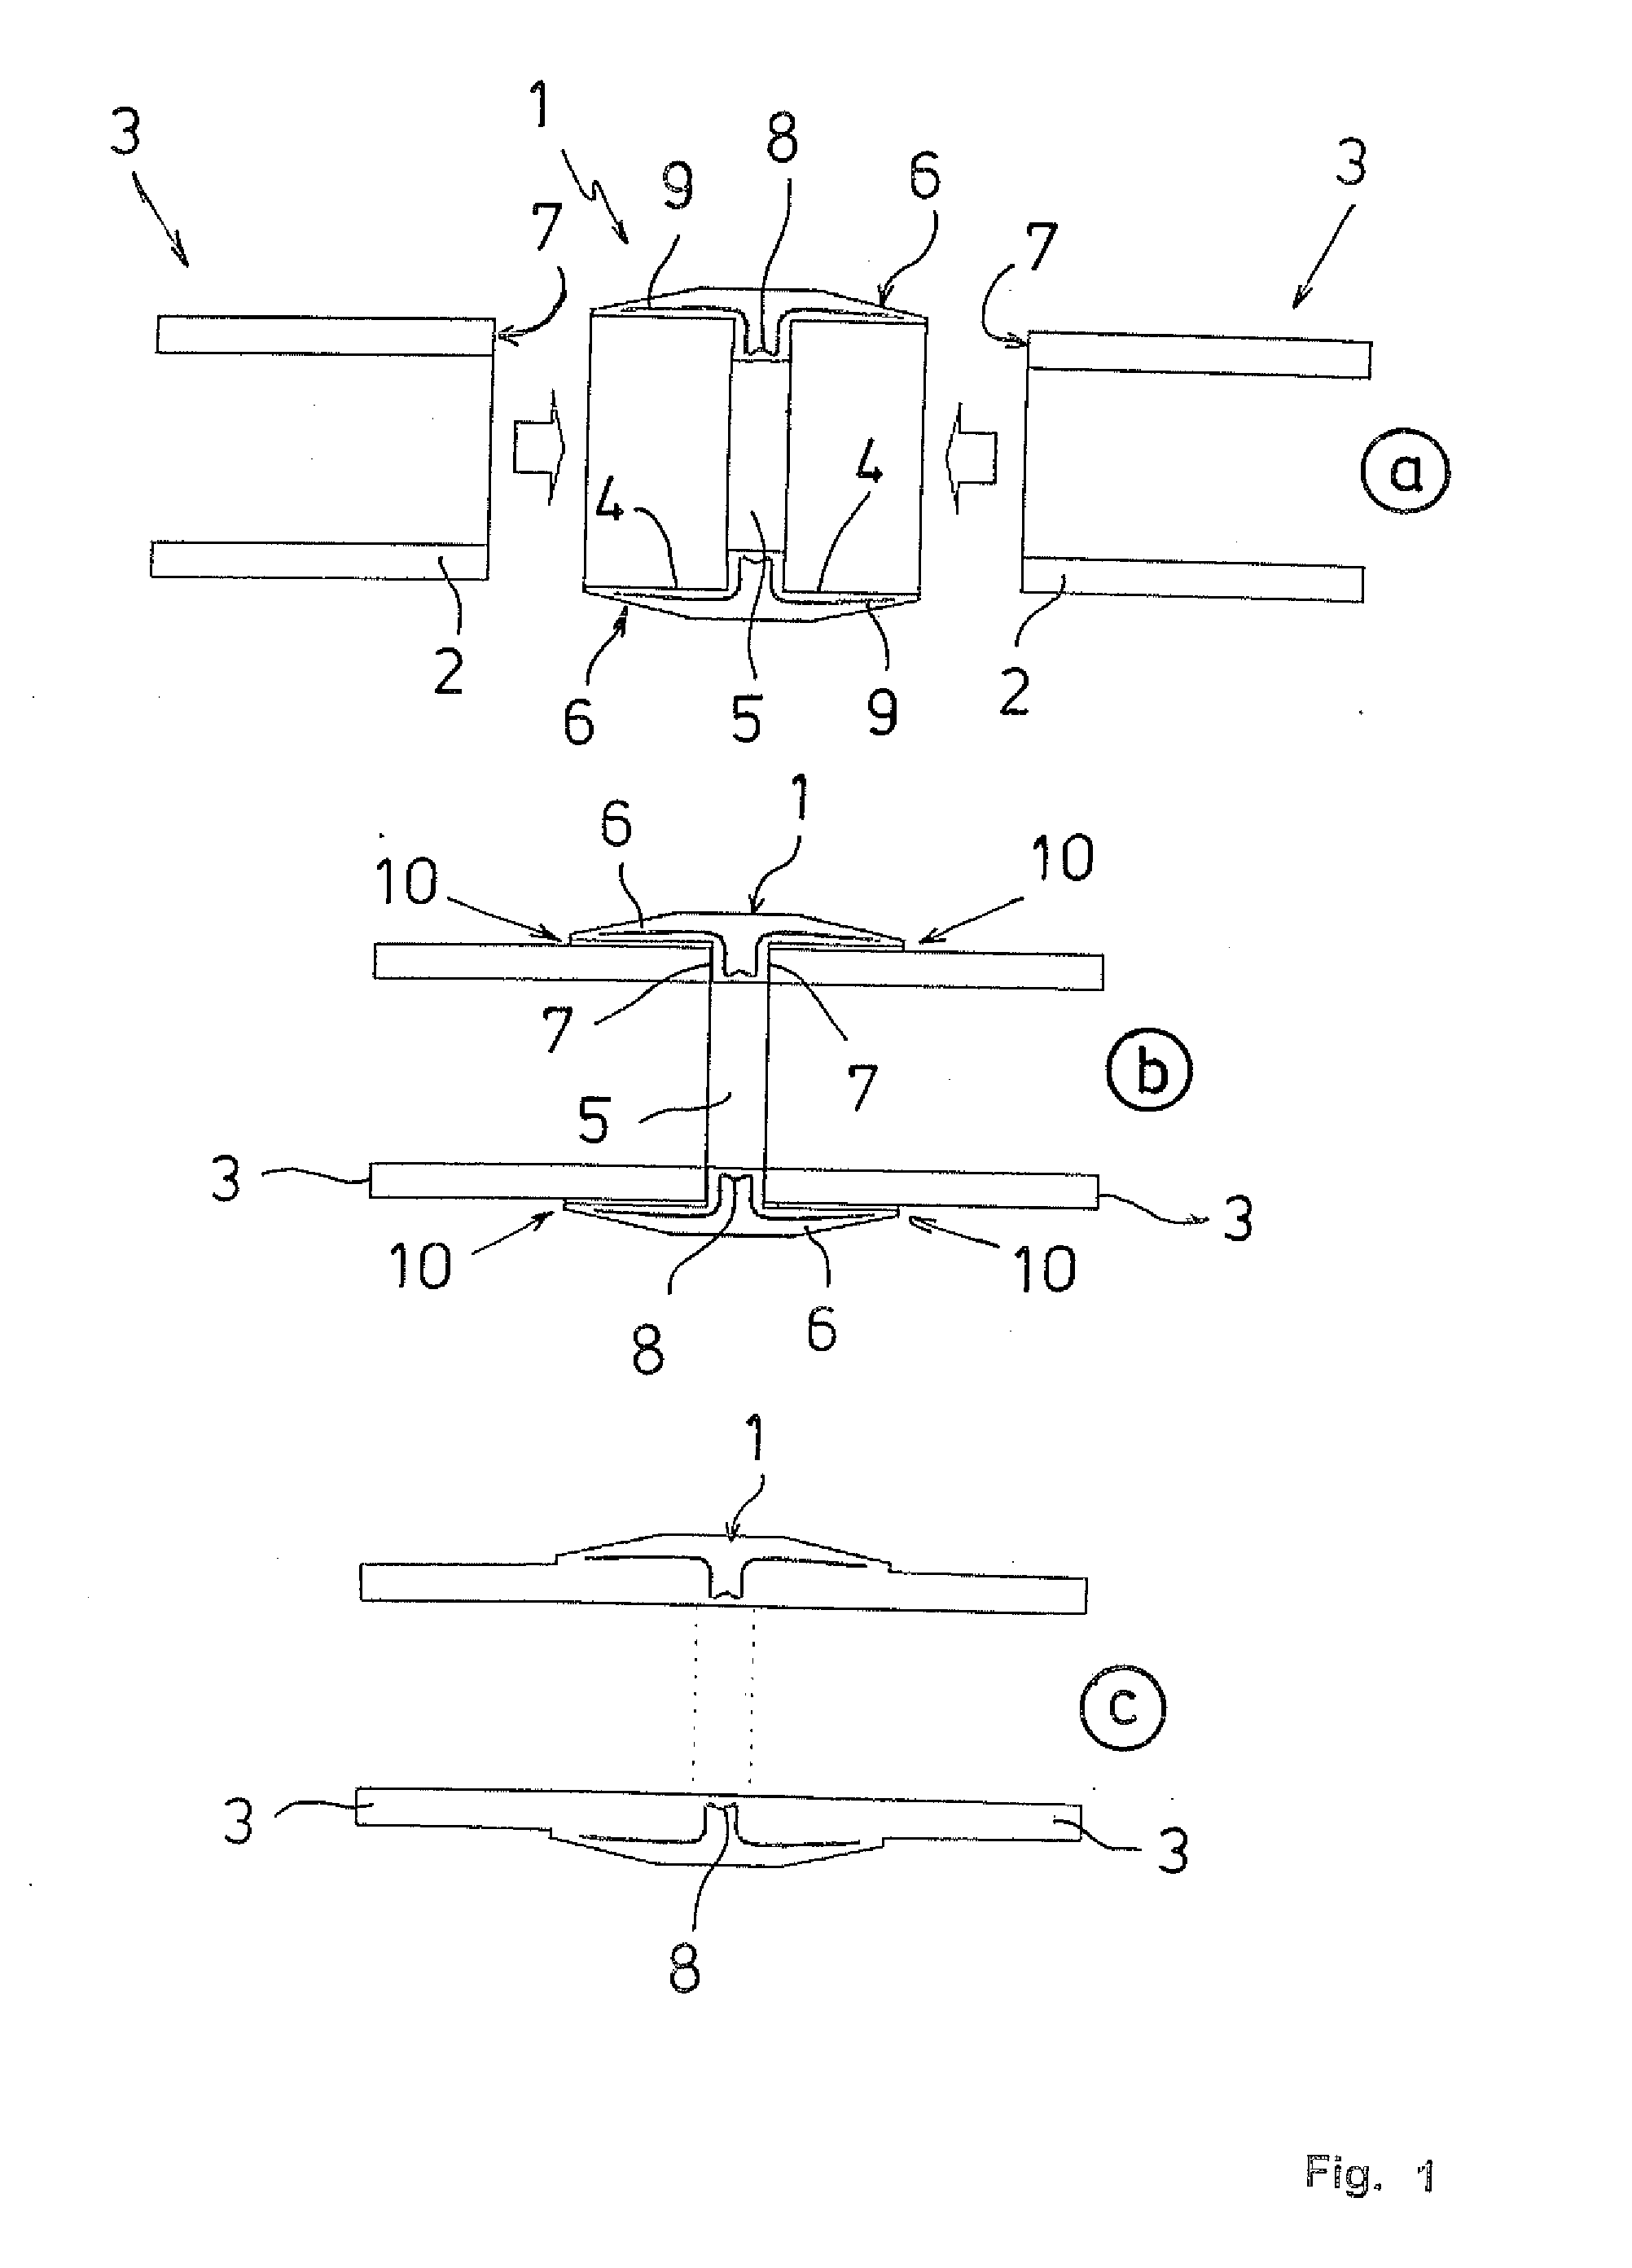 Induction connecting sleeve for connecting weldable thermoplastic elements by means of fusion